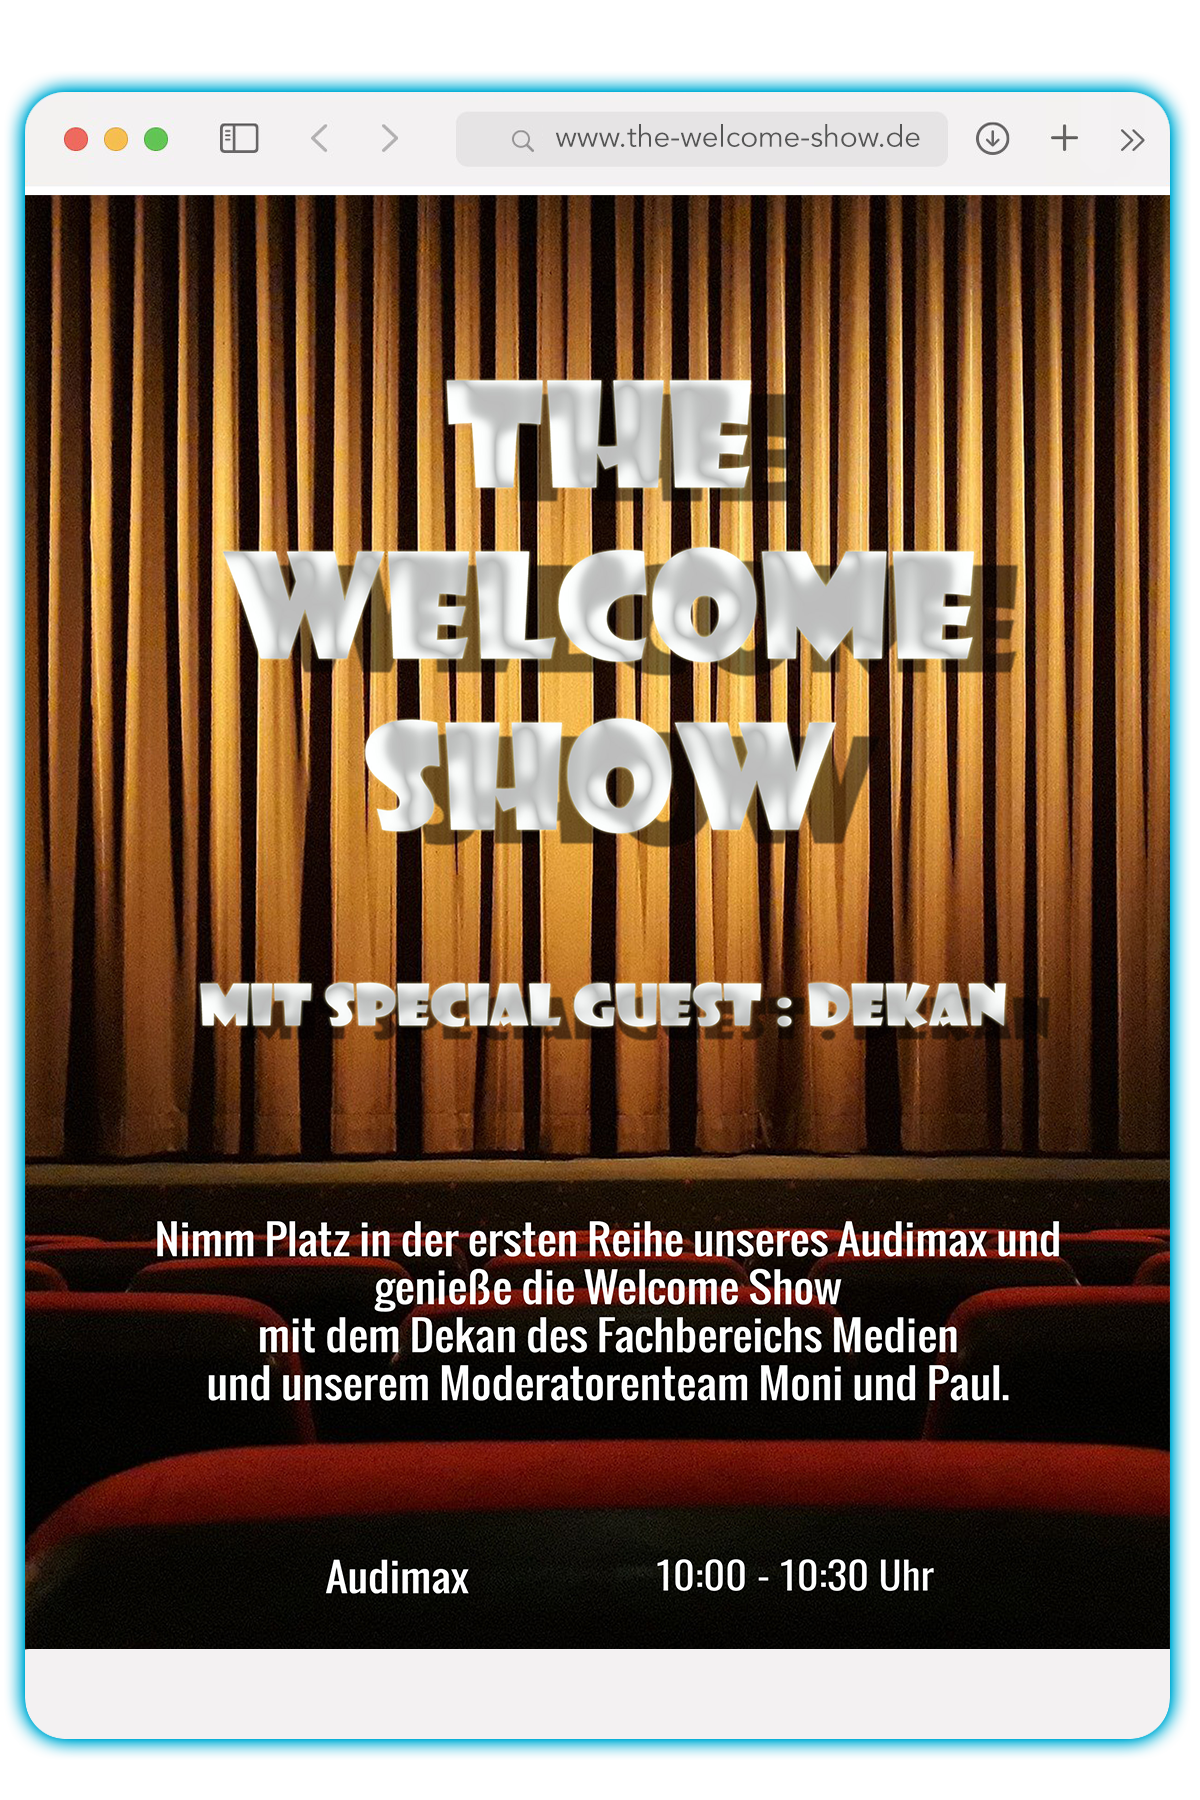 The Welcome Show